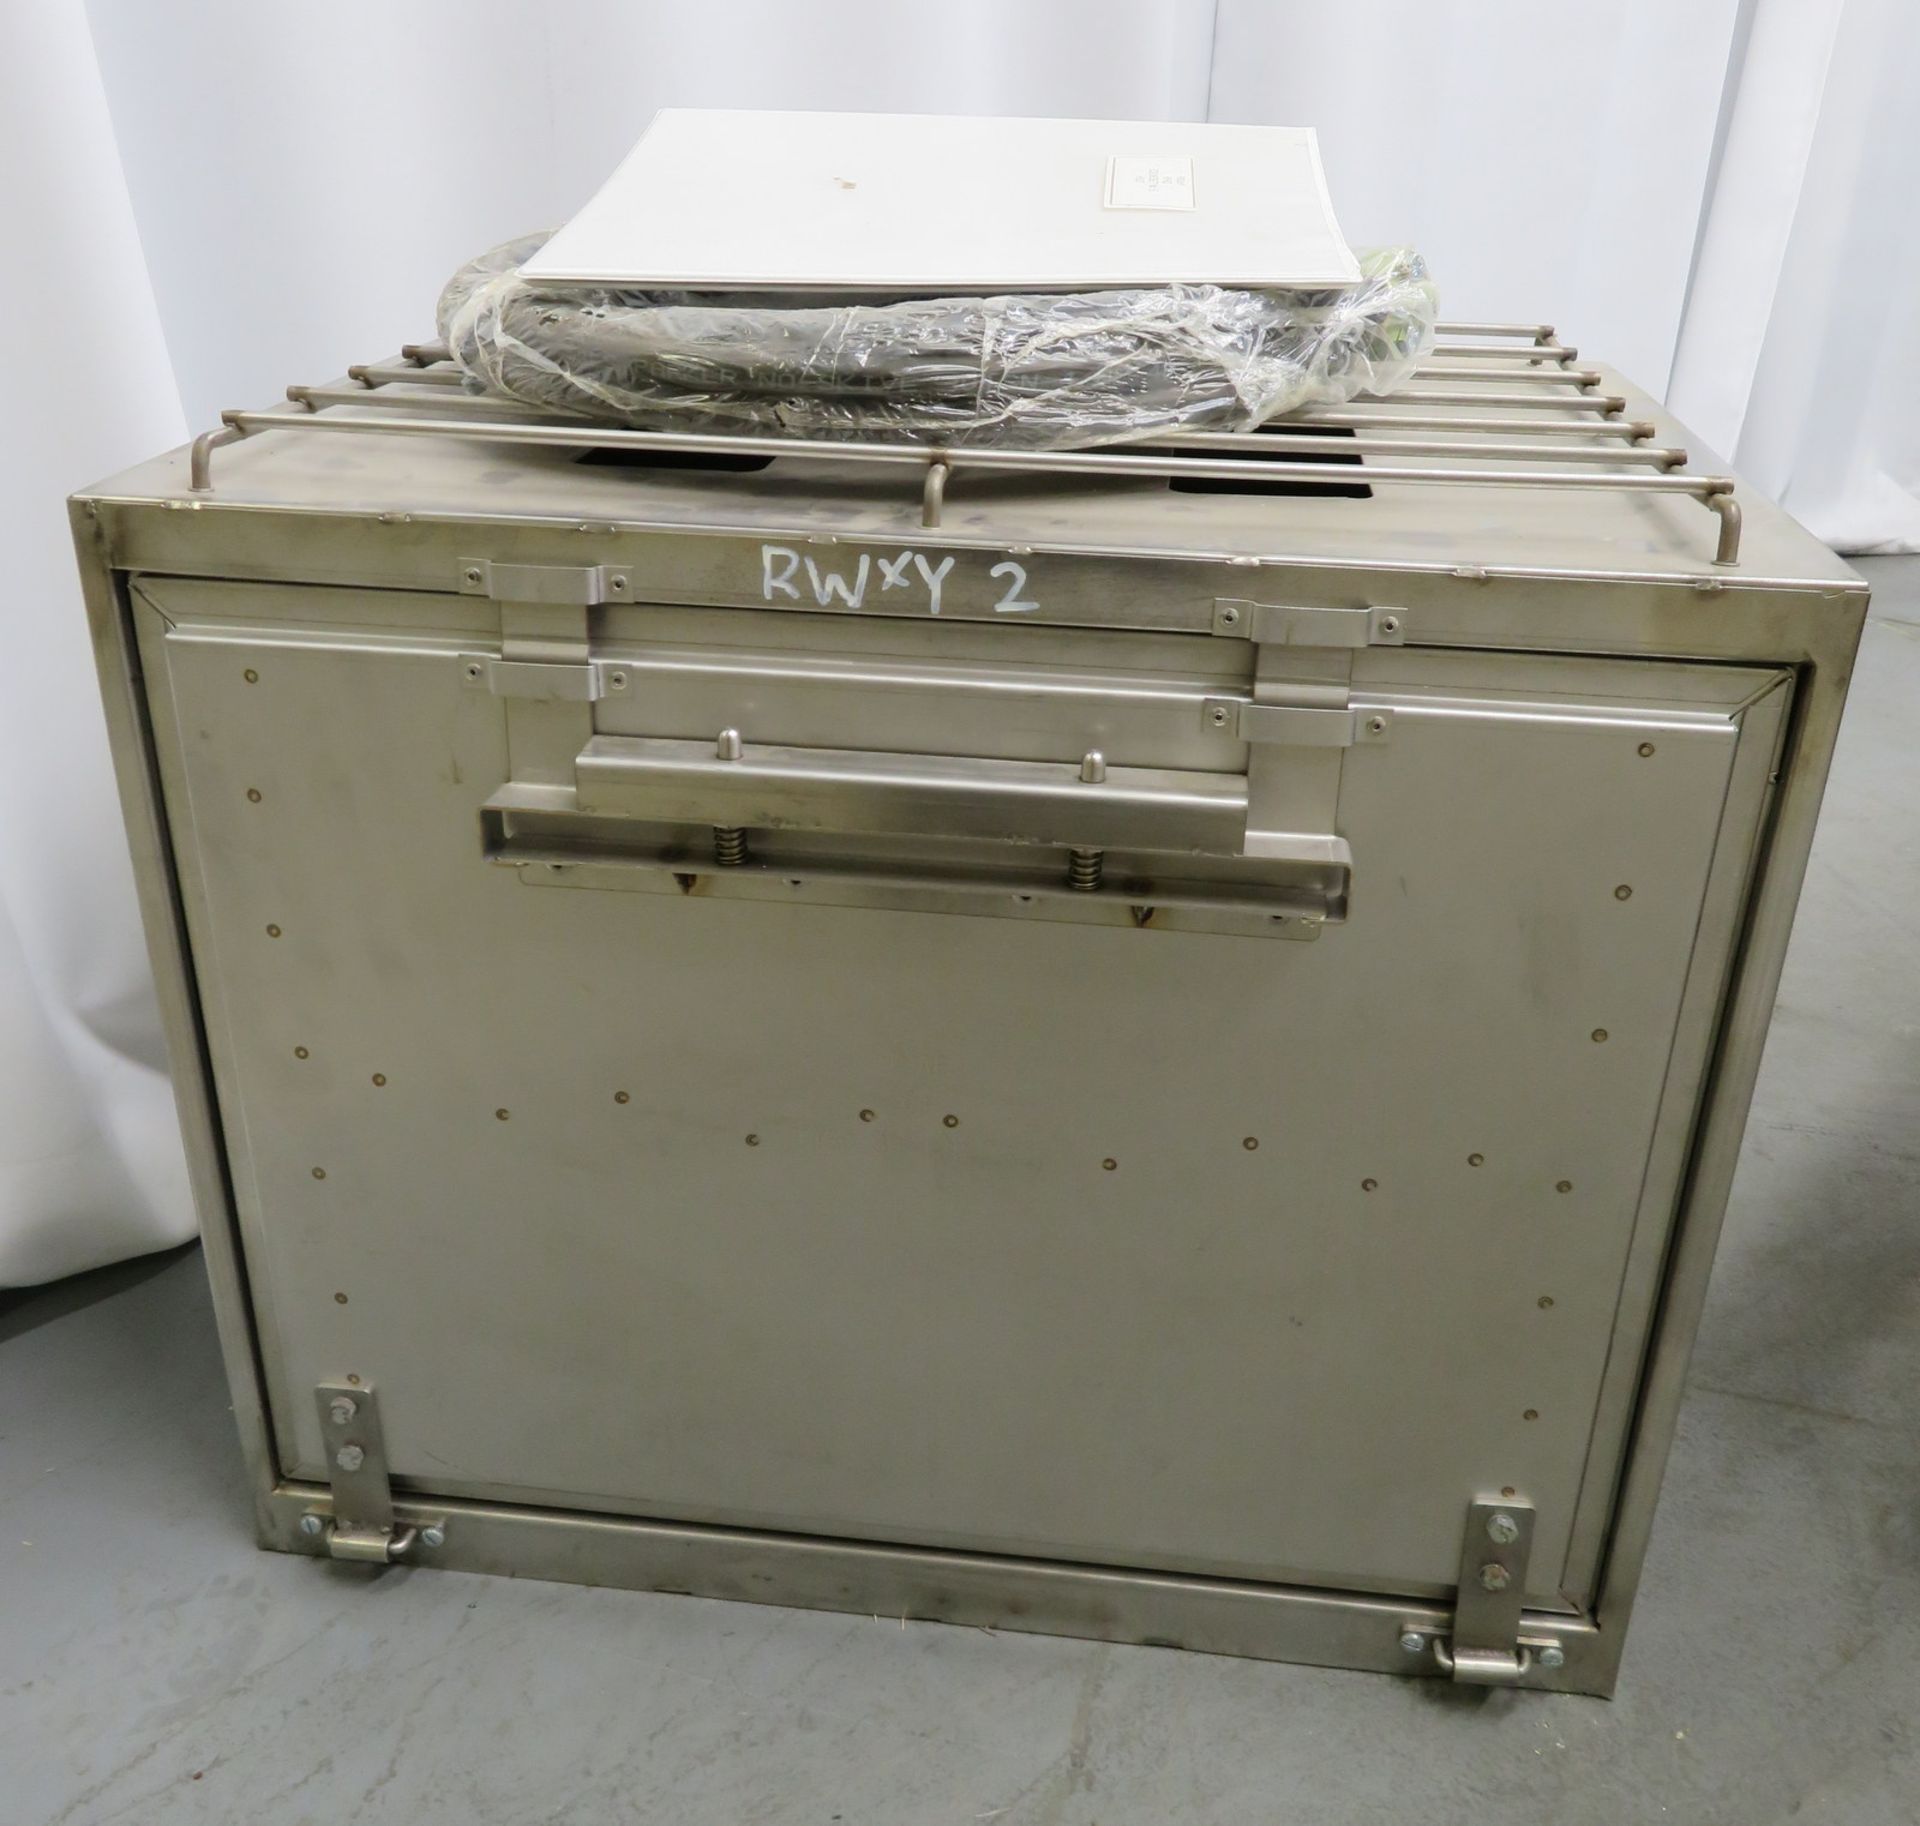 British Army No 5 field cooker & G1 No 5 hot box field oven set. - Image 8 of 24